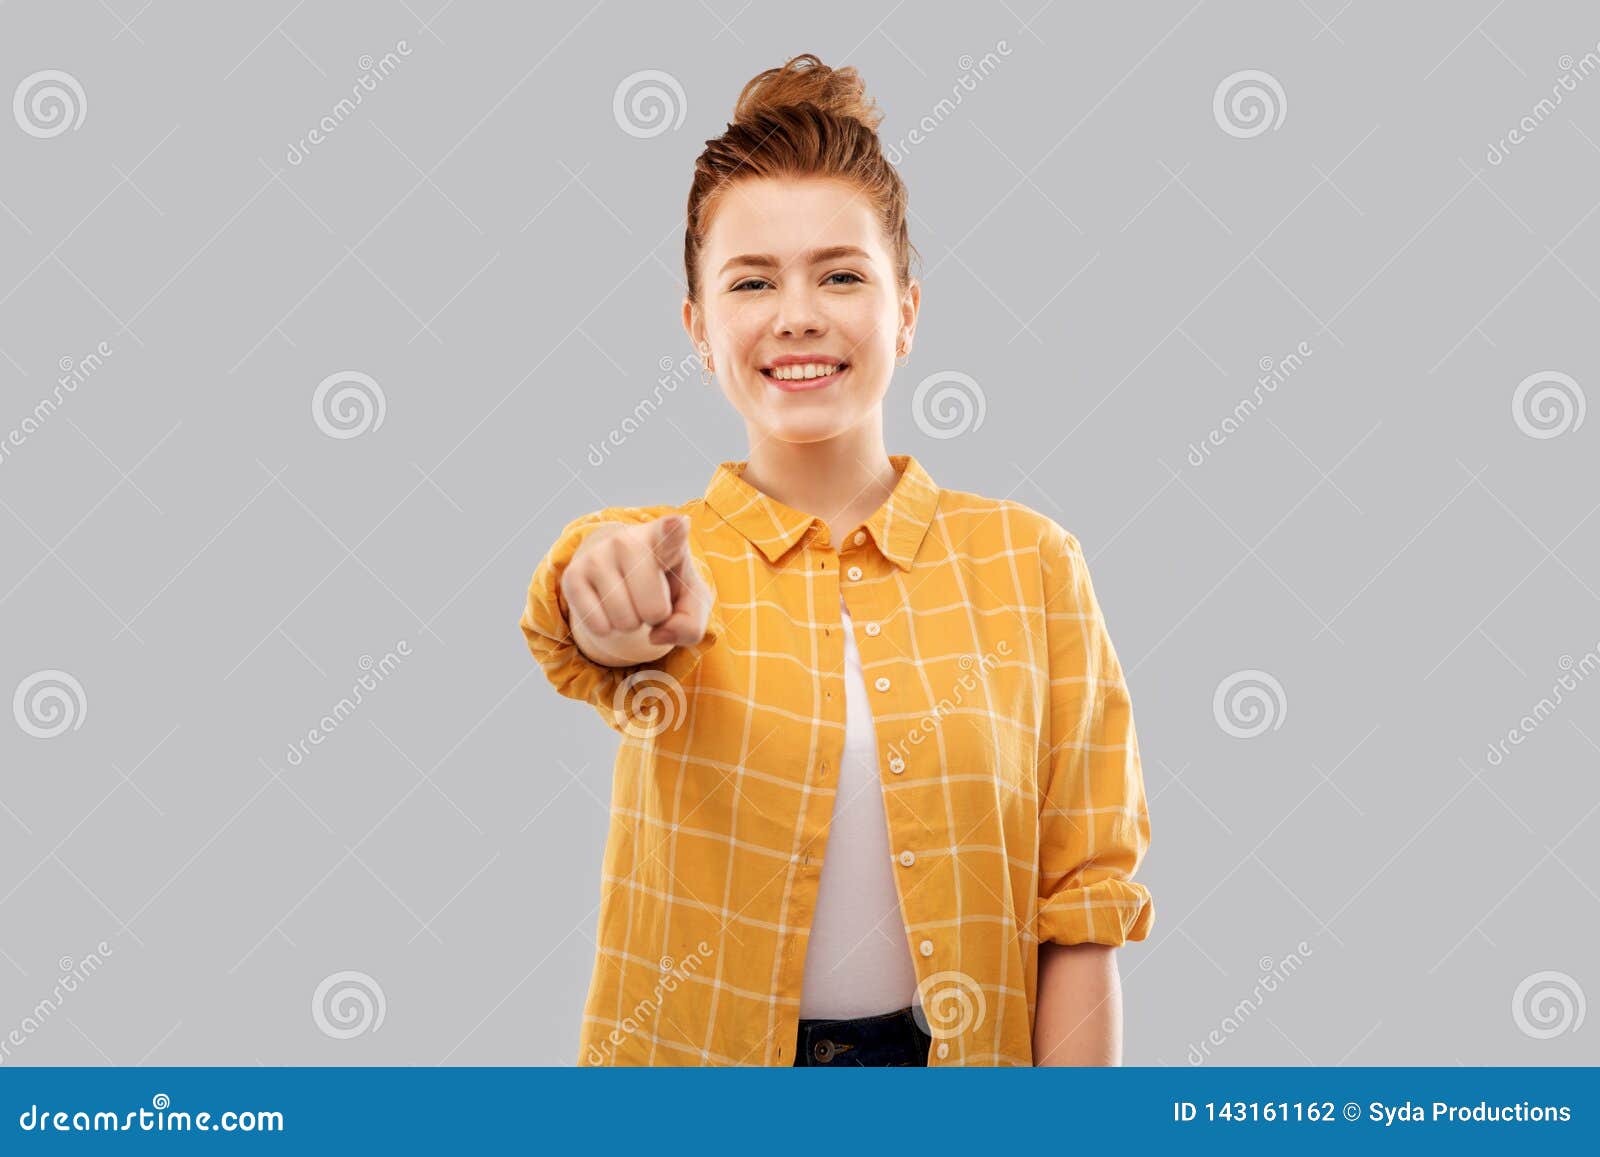 Smiling Red Haired Teenage Girl in Checkered Shirt Stock Photo - Image ...